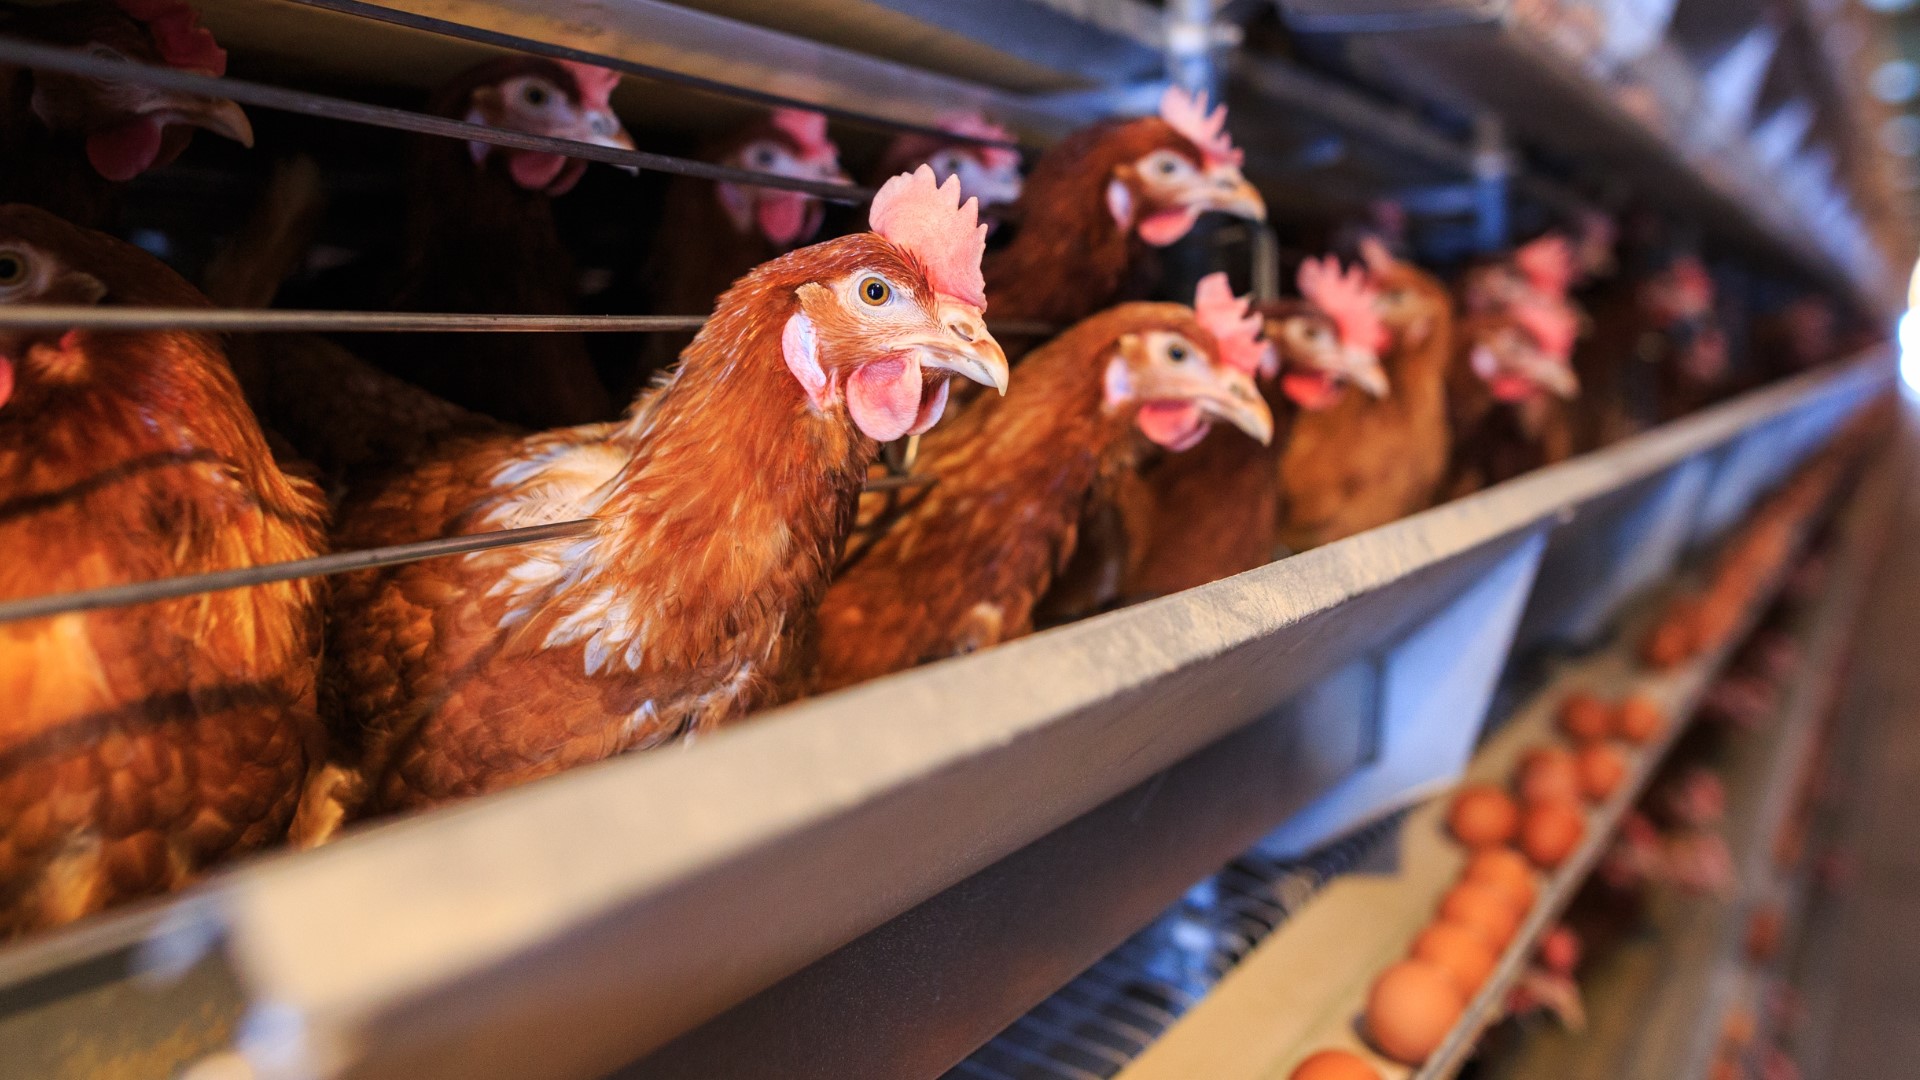 H5N1 bird flu What to know about the outbreak and food safety